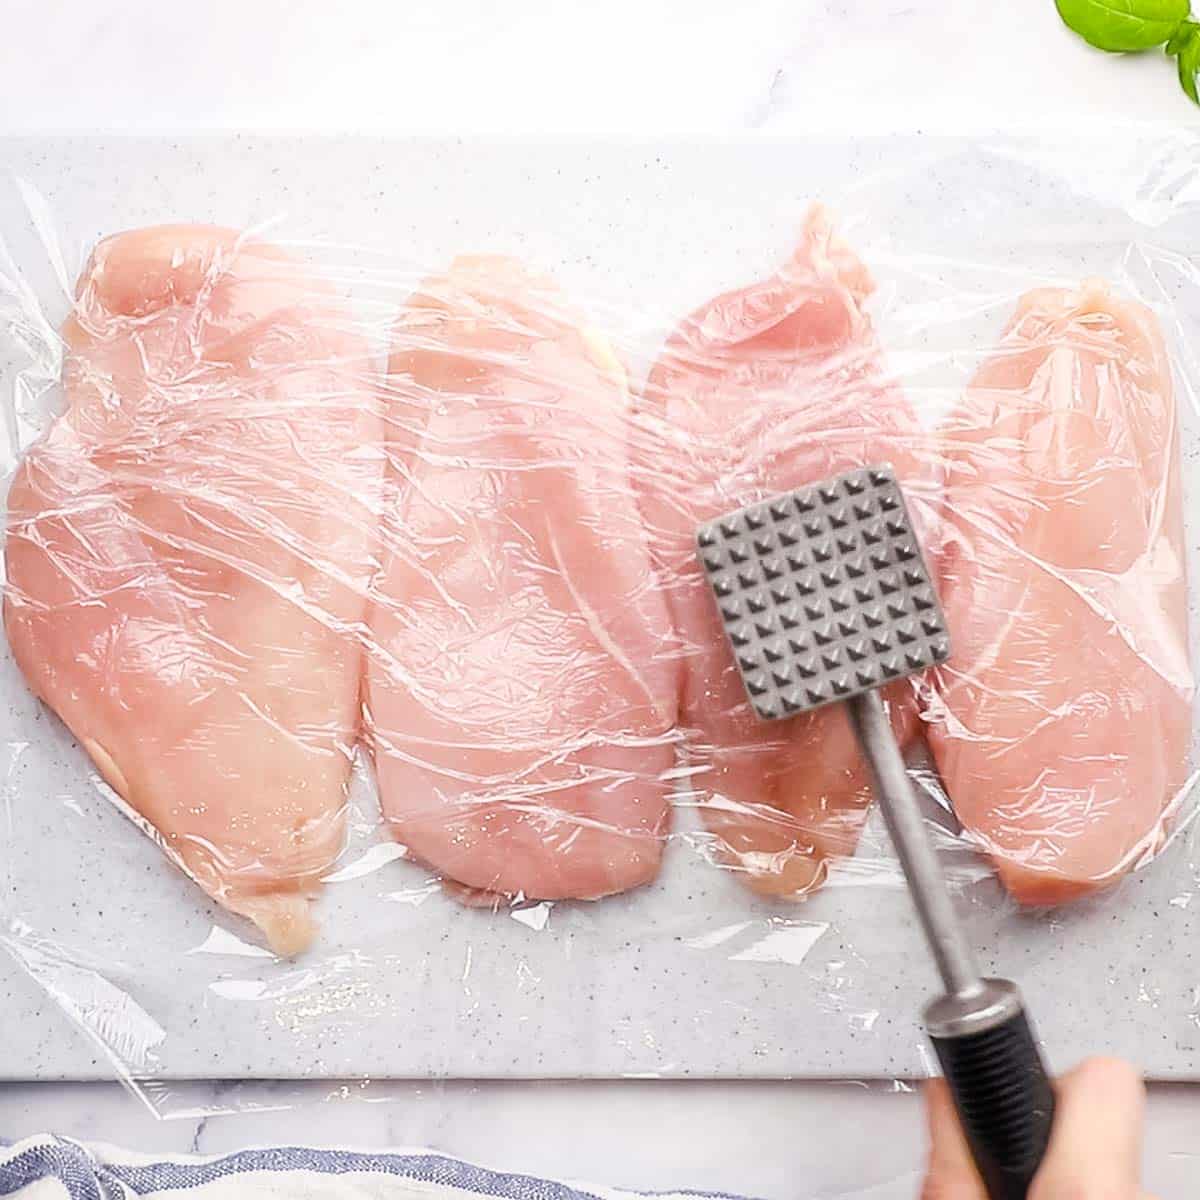 pounding the chicken breasts with a meat mallet